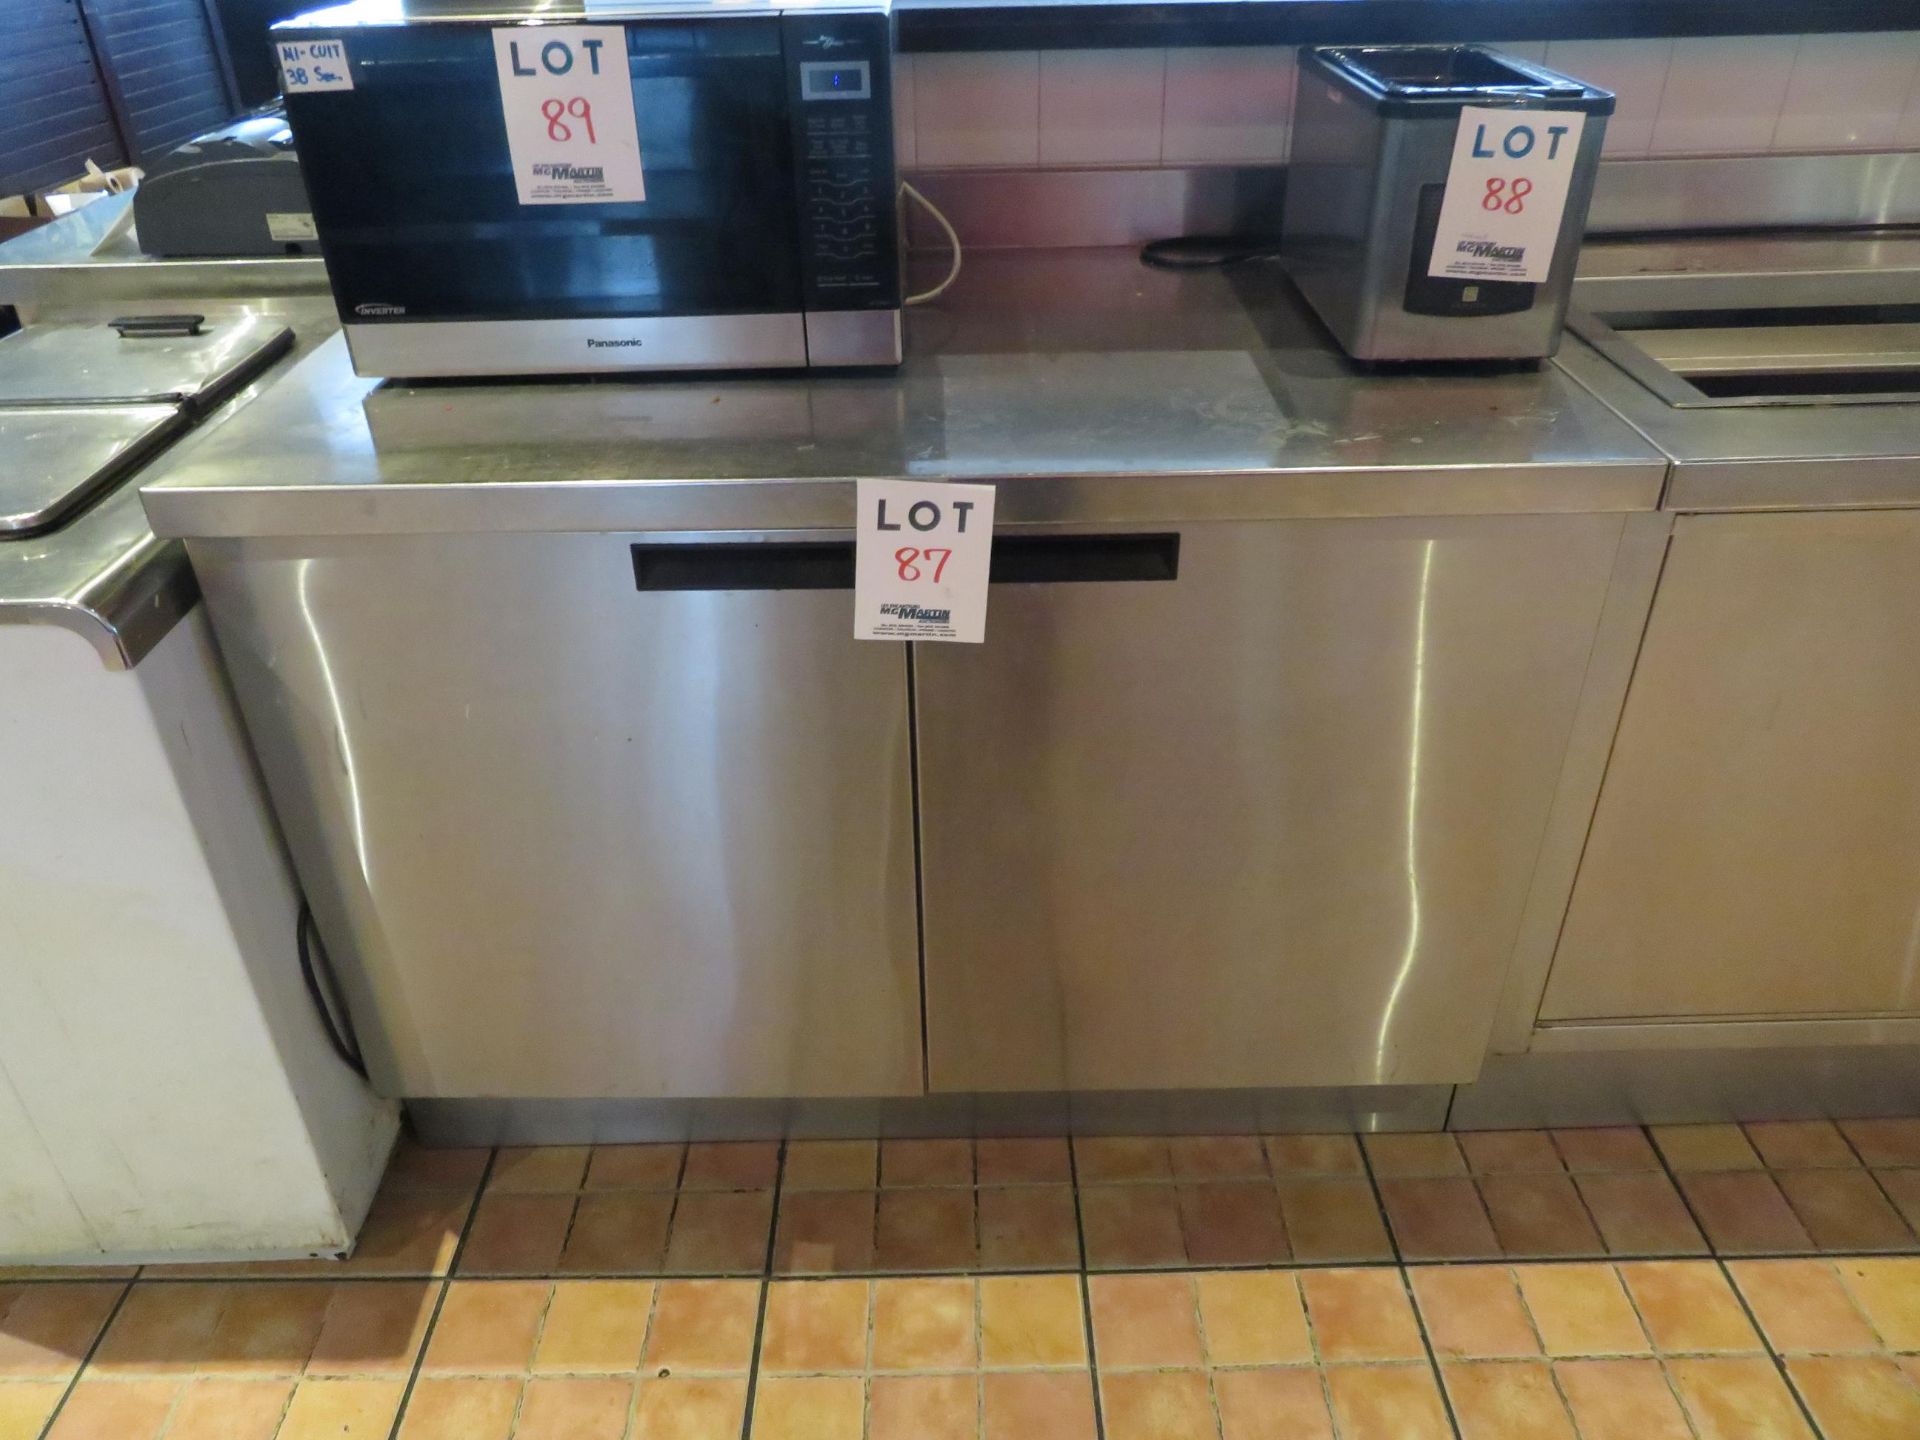 Stainles steel 2 door refrigerated counter approx. 48"w x 30"x 35"h